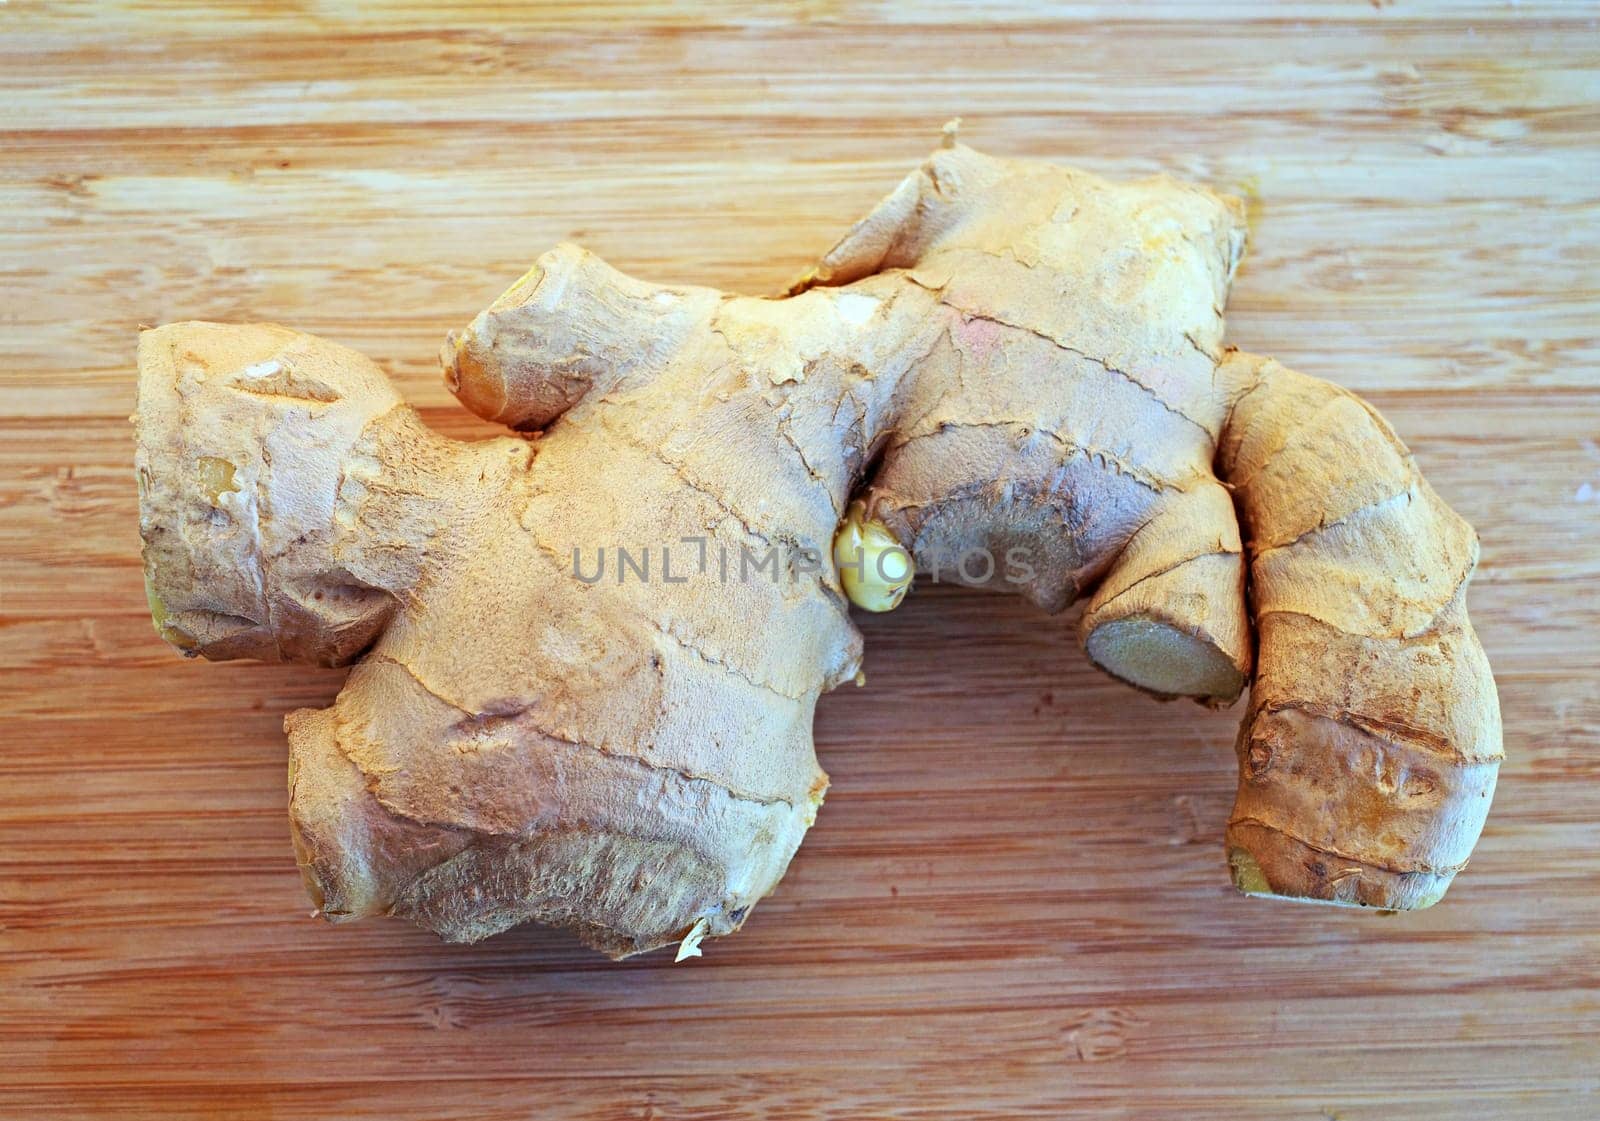 Part of an irregularly shaped fresh ginger root on a wooden cutting board. Top view